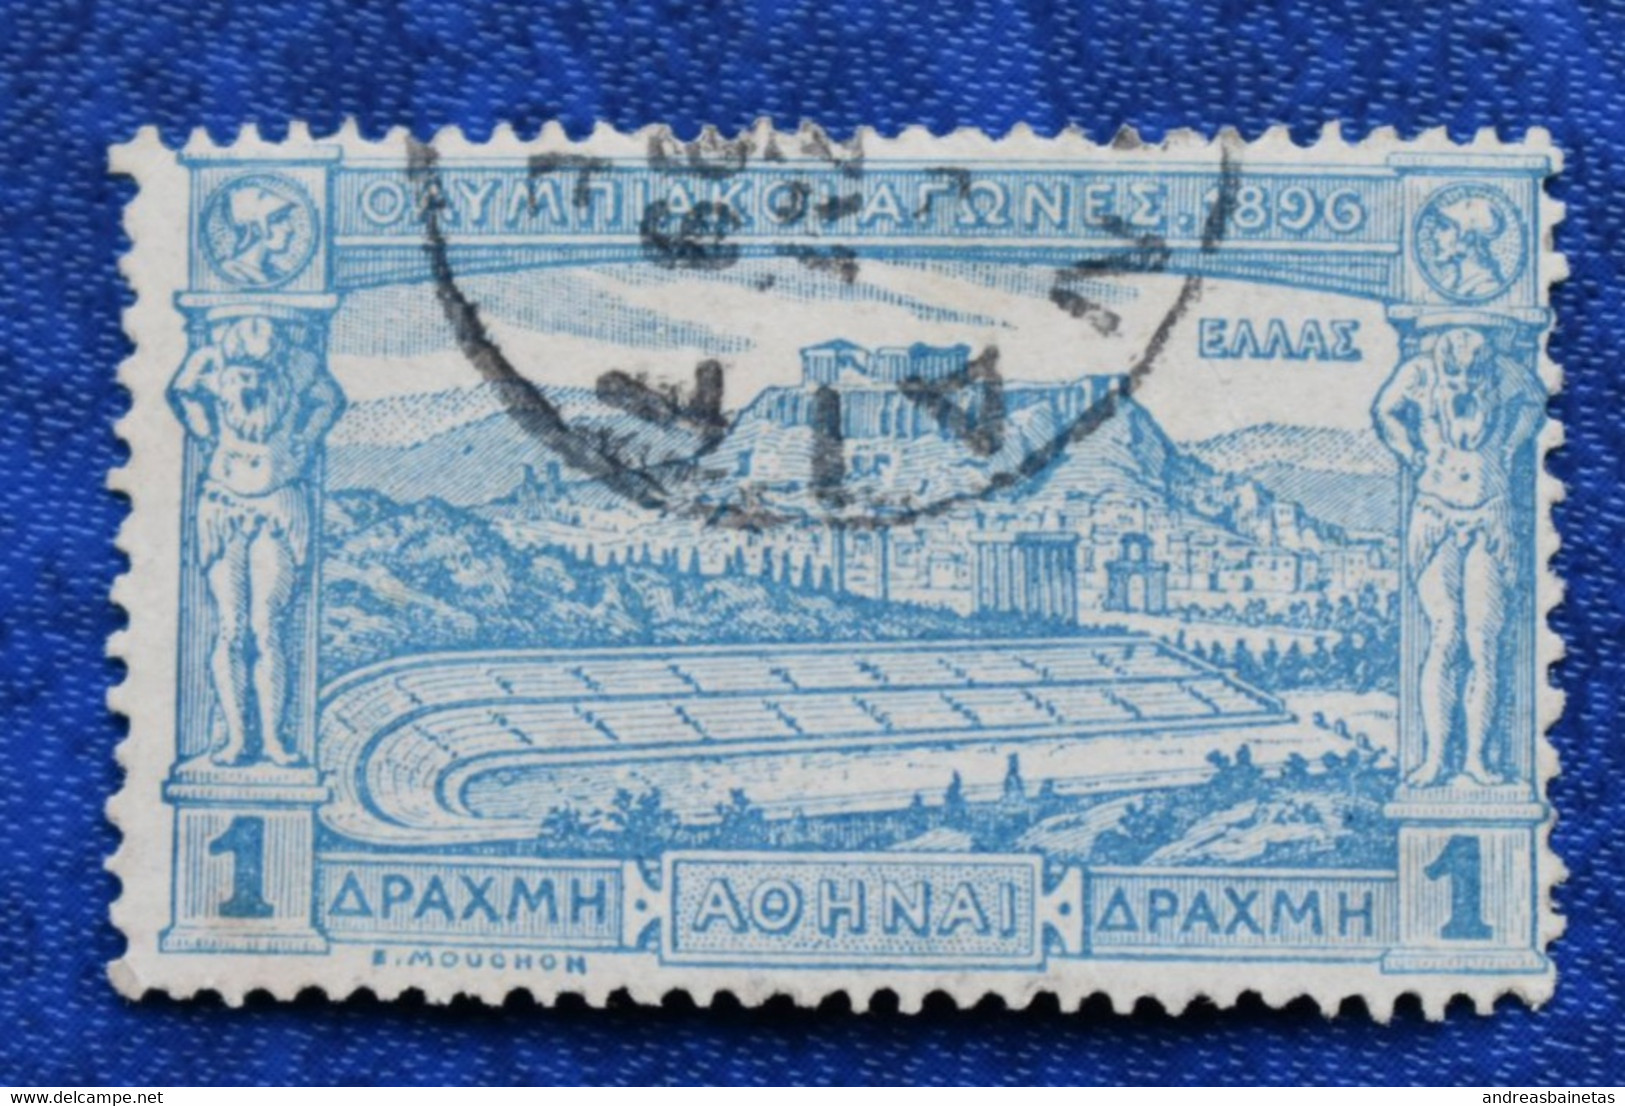 Stamps GREECE 1896 The 1st Modern Olympic Games 1 ₯ - Greek Drachma Used - Usati